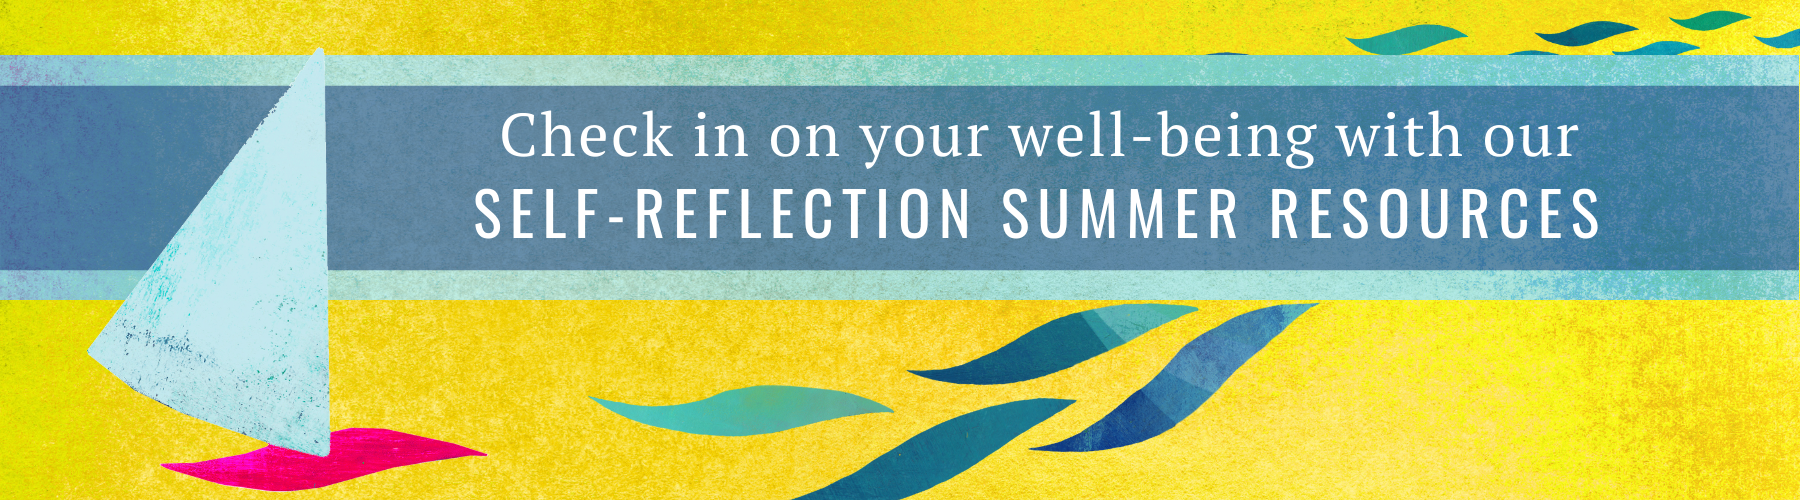 Self-Reflection Summer Resources